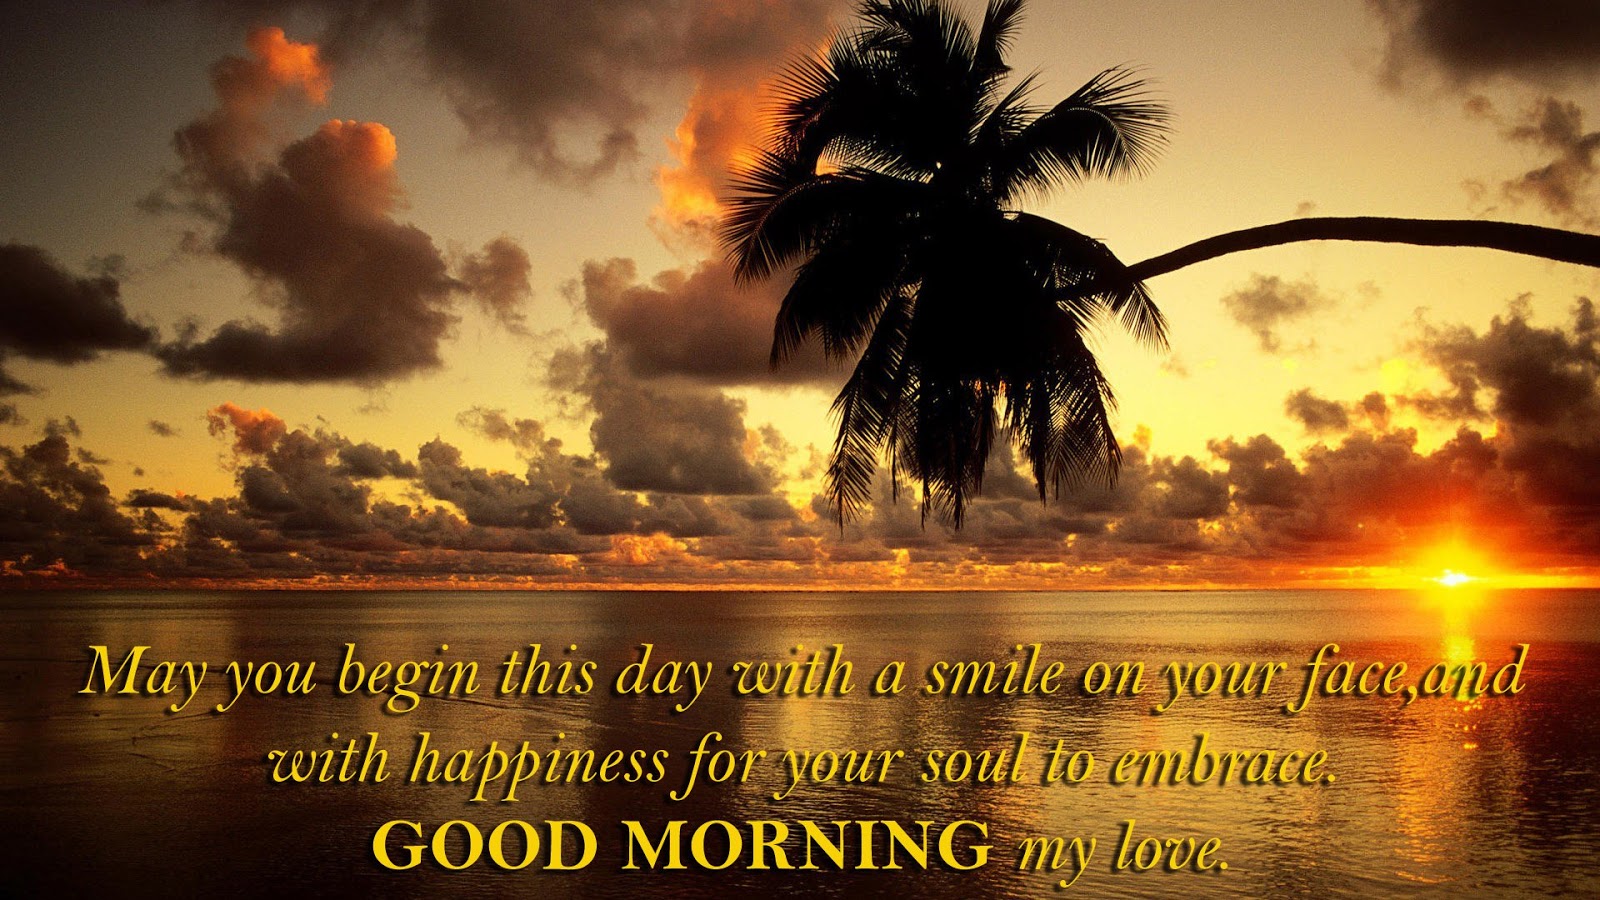 good morning my love · may you begin this day with a smile on your face